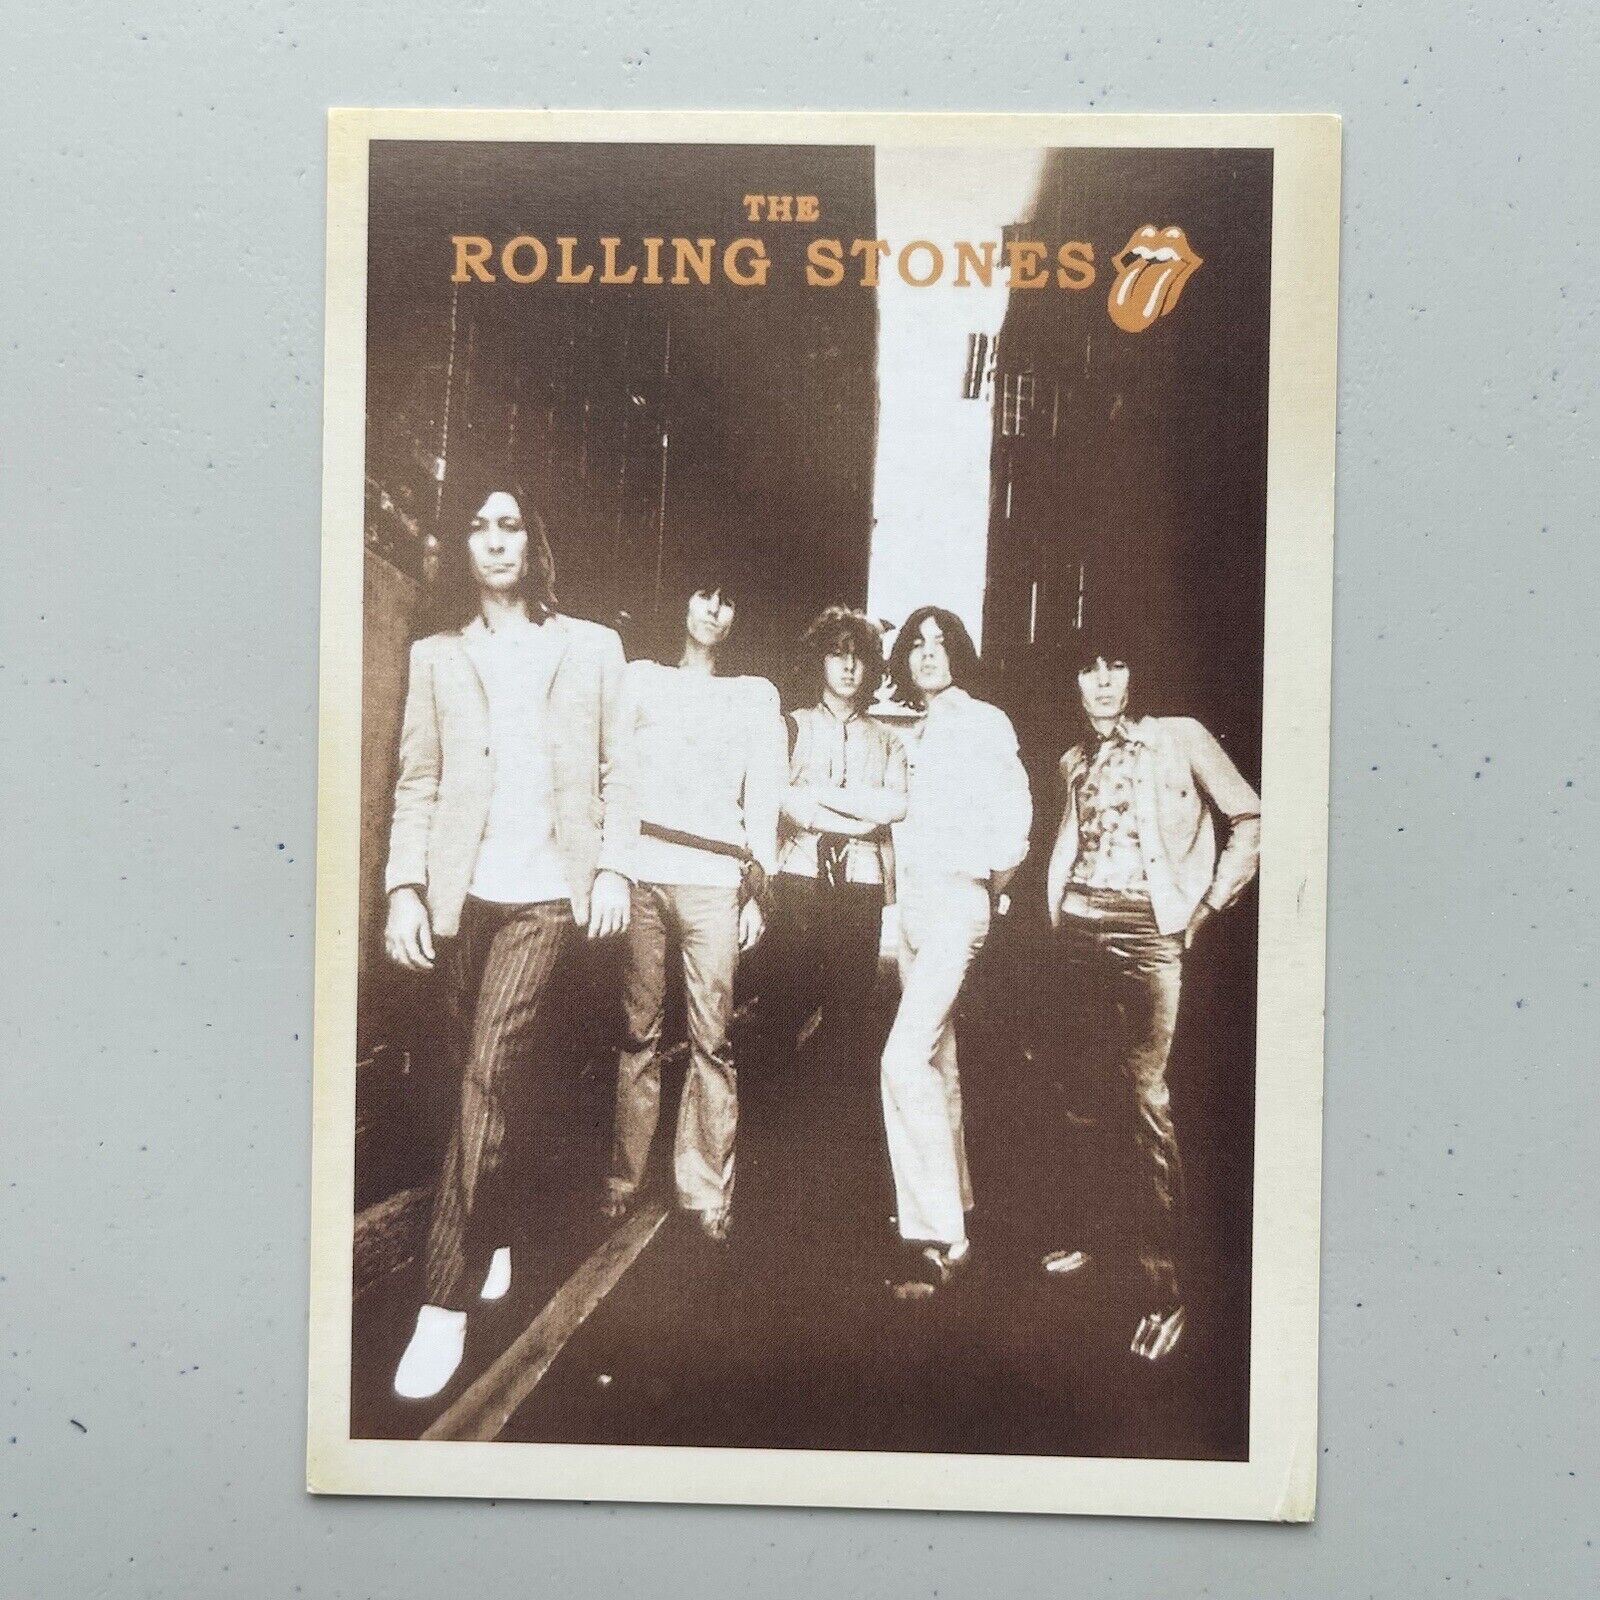 The Rolling Stones Postcard 1969 Image on Modern Card